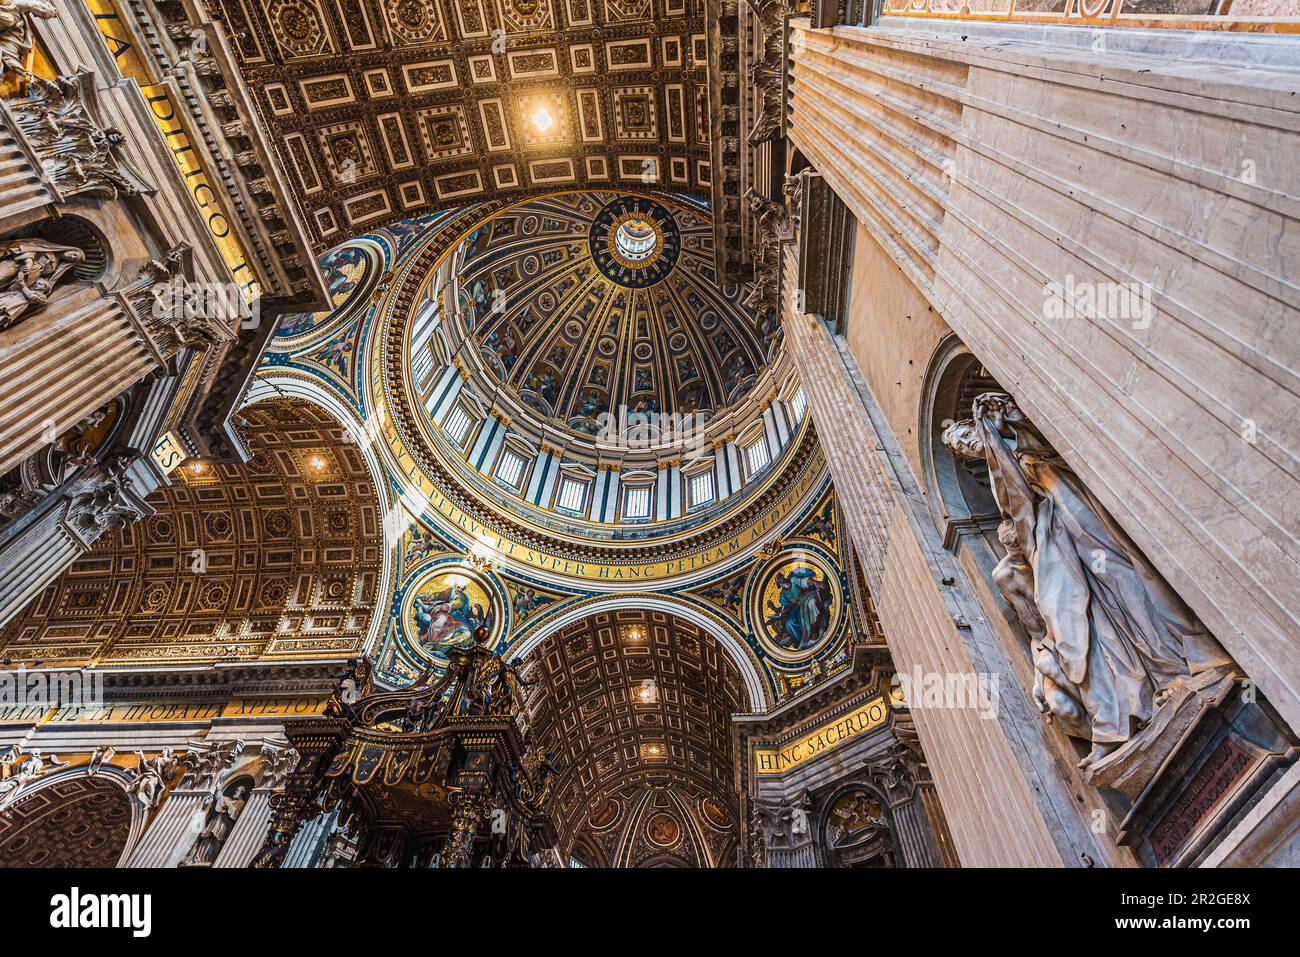 Altar and dome of St. Peter's Basilica from inside, Rome, Lazio, Italy, Europe Stock Photo